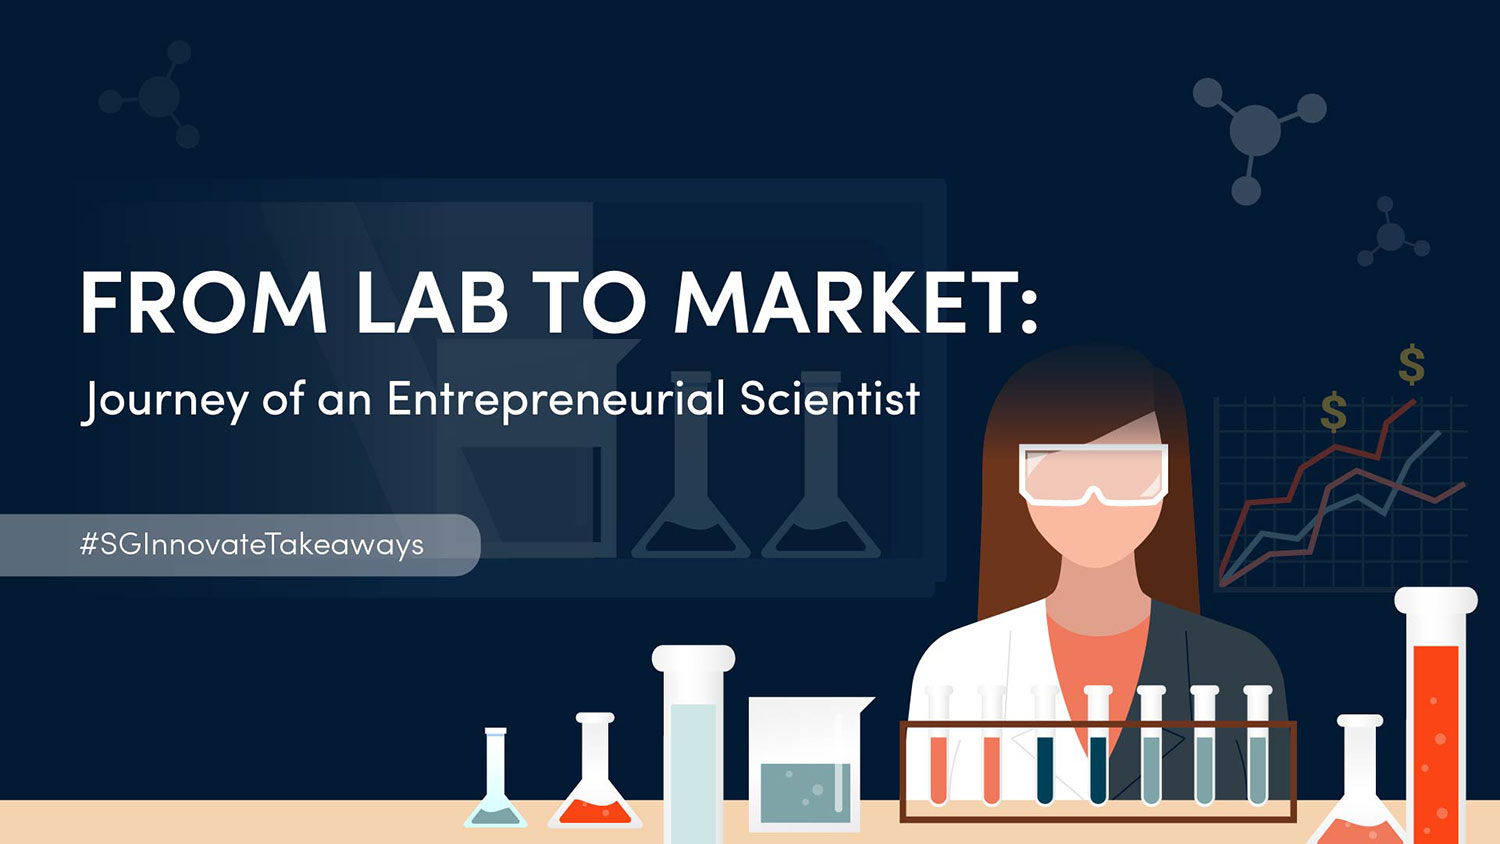 From Lab to Market: Journey of an Entrepreneurial Scientist